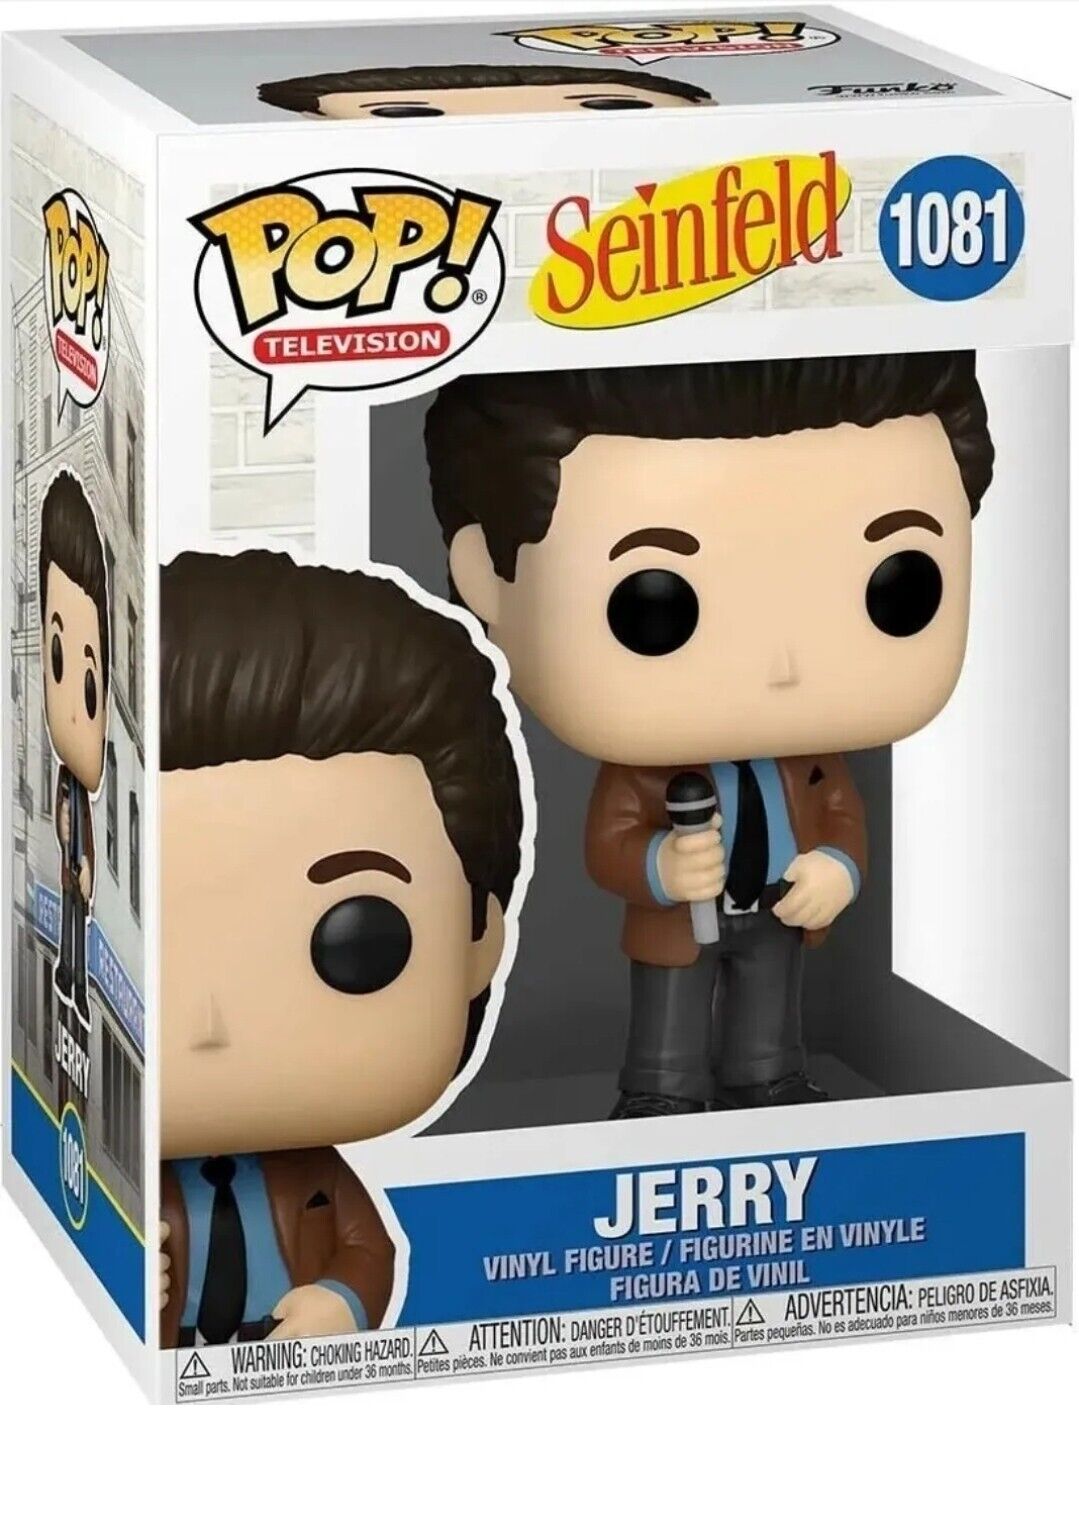 Funko POP Television - Seinfeld Vinyl Figure - JERRY (Stand-Up) #1081 